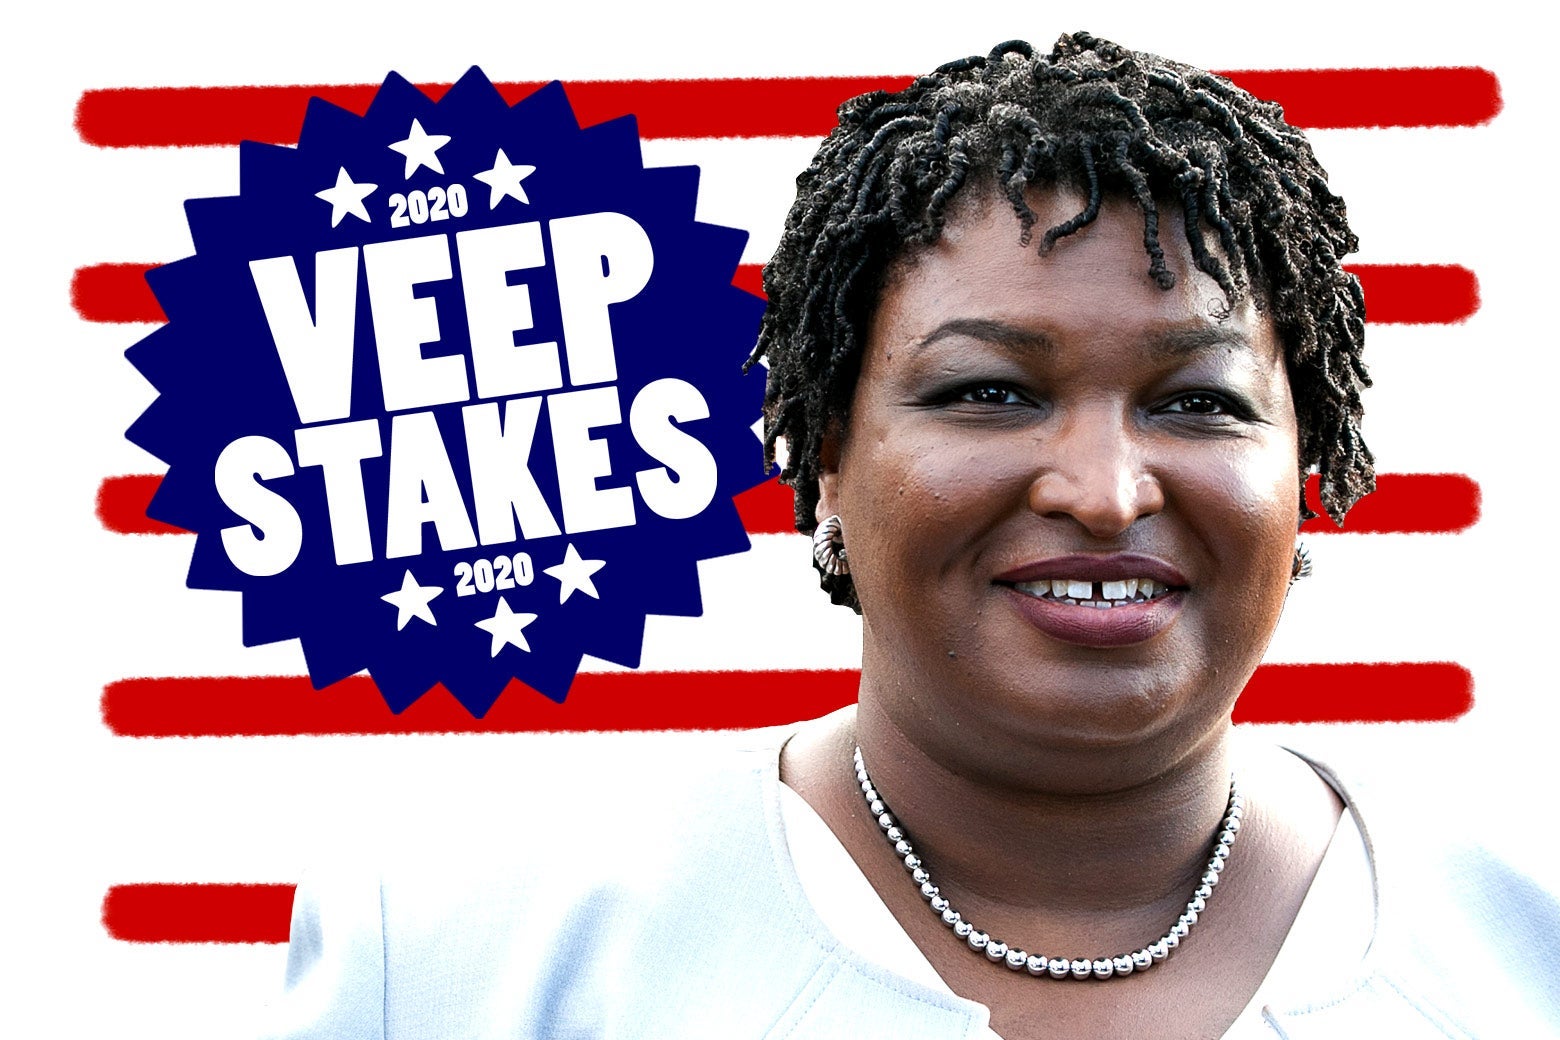 Abrams in a pale blue blazer appears over a backdrop of red stripes and a blue "2020 VEEP STAKES 2020" badge.